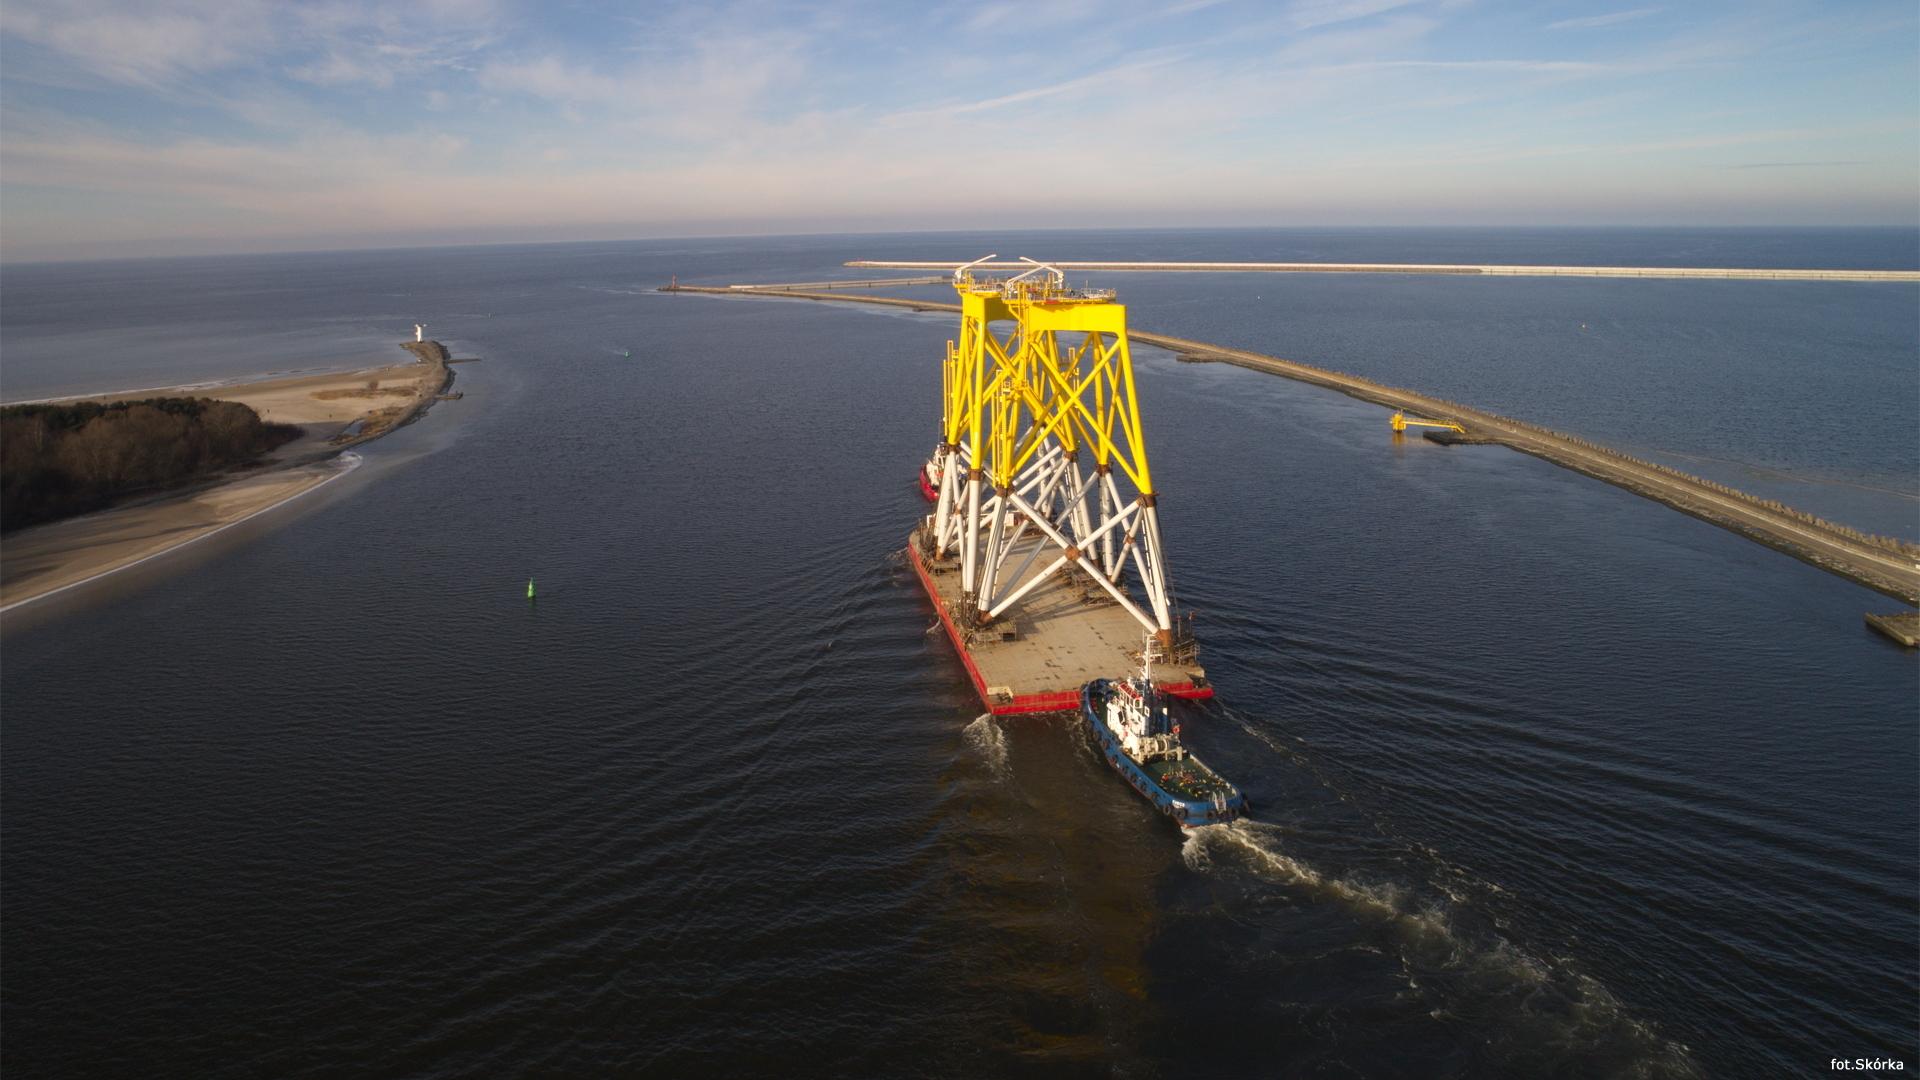 First Borkum Riffgrund 2 Jackets Embark for Cuxhaven from ST3 Offshore